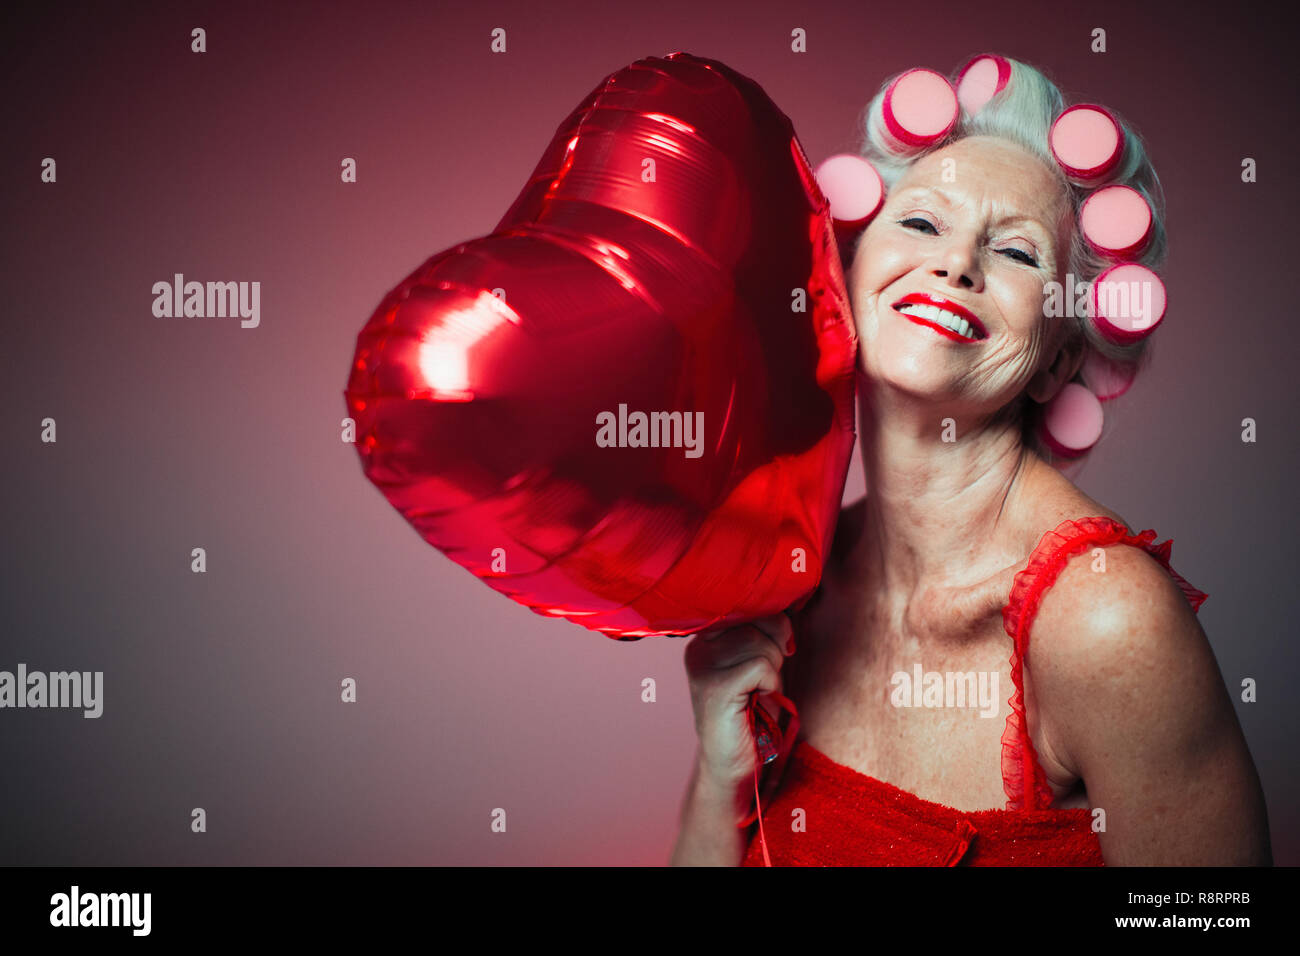 Espiègle Portrait senior woman with hair in curlers holding heart-shape balloon Banque D'Images